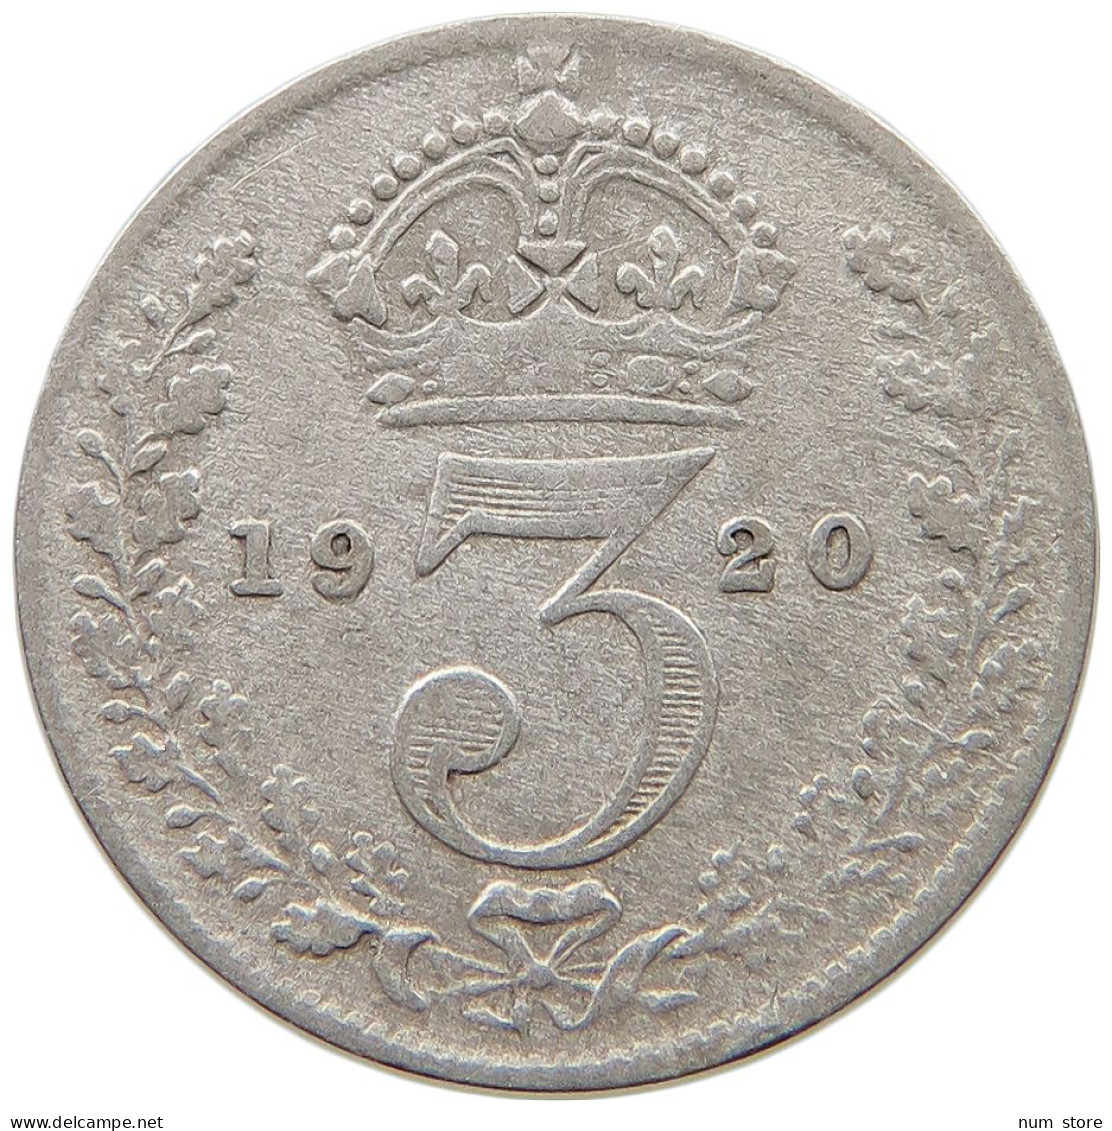 GREAT BRITAIN THREEPENCE 1920 #s059 0499 - F. 3 Pence